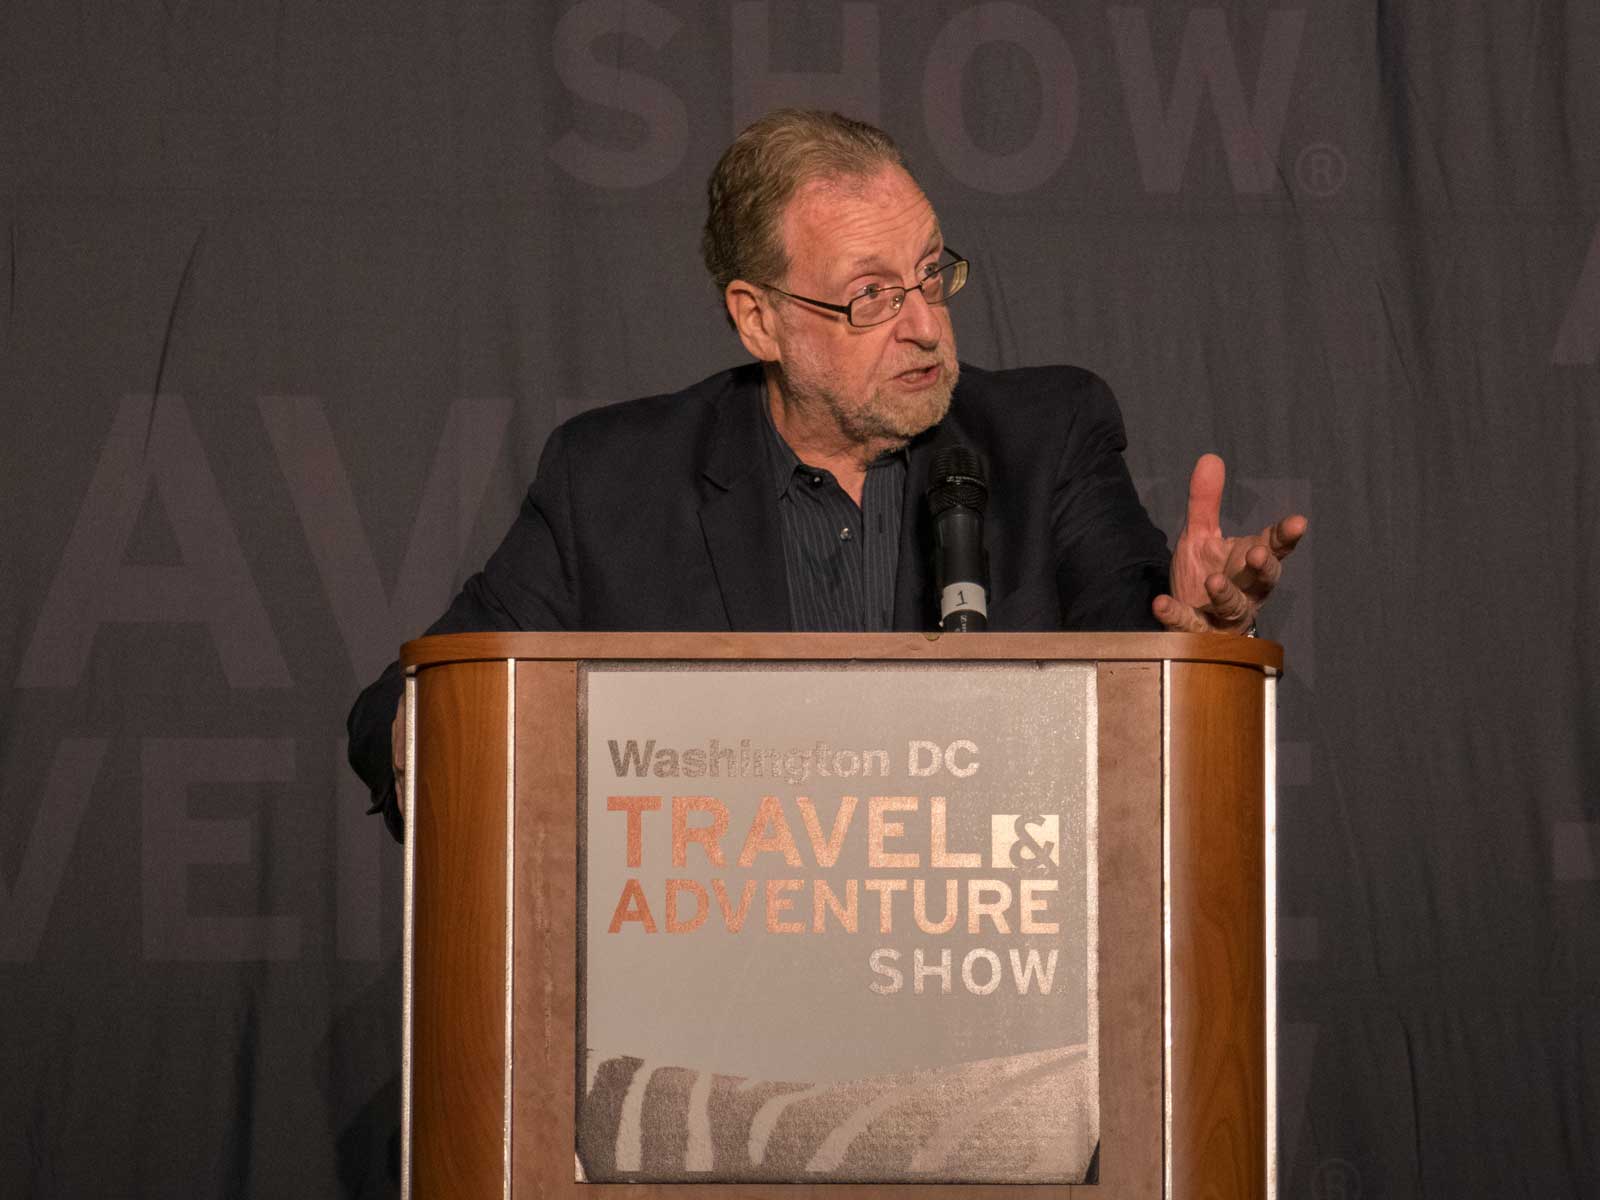 Peter Greenberg at the 2018 DC Travel & Adventure Show